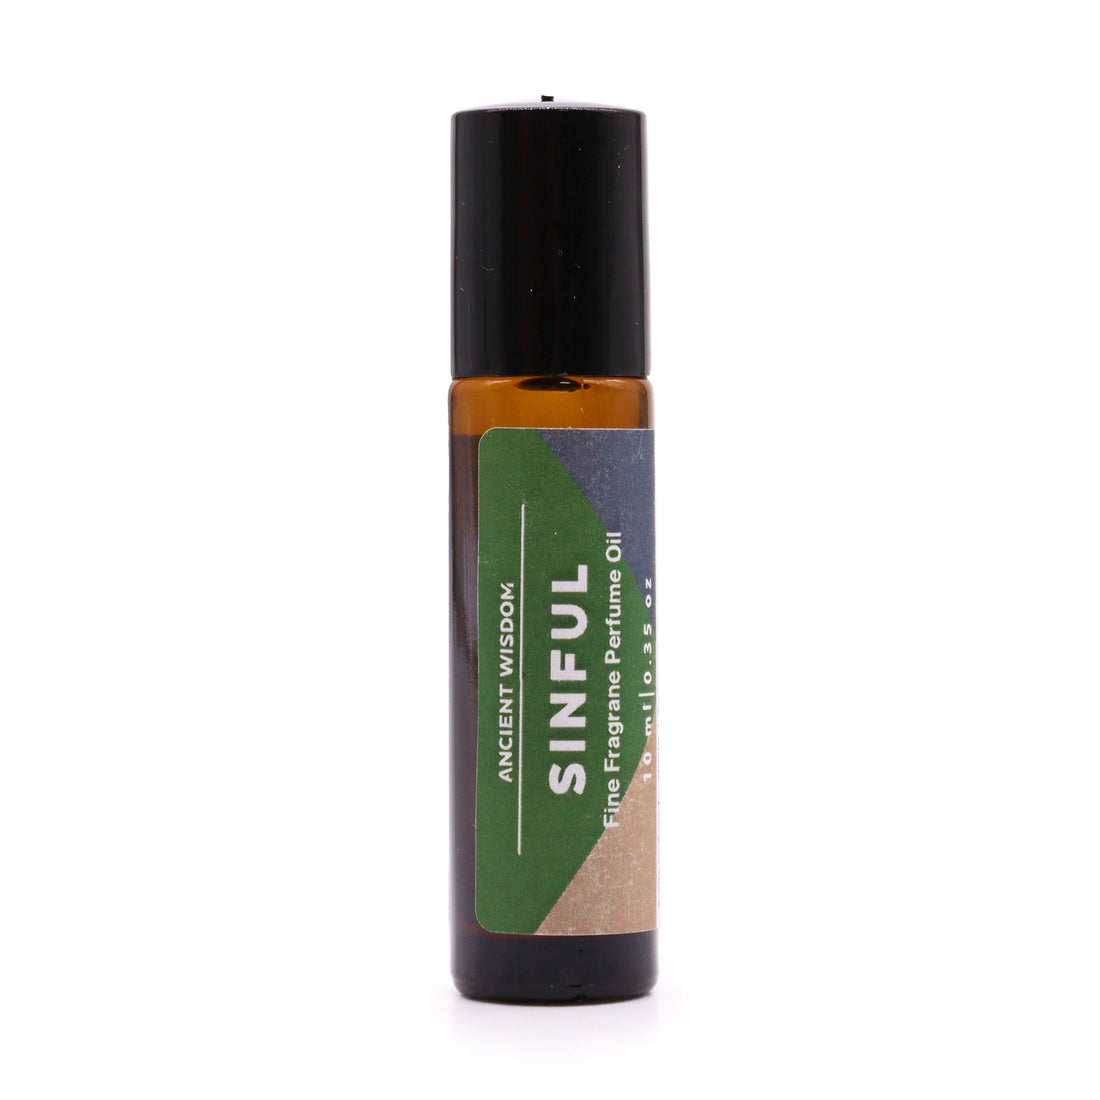 Sinful Fine Fragrance Perfume Oil 10ml - Inspired by &